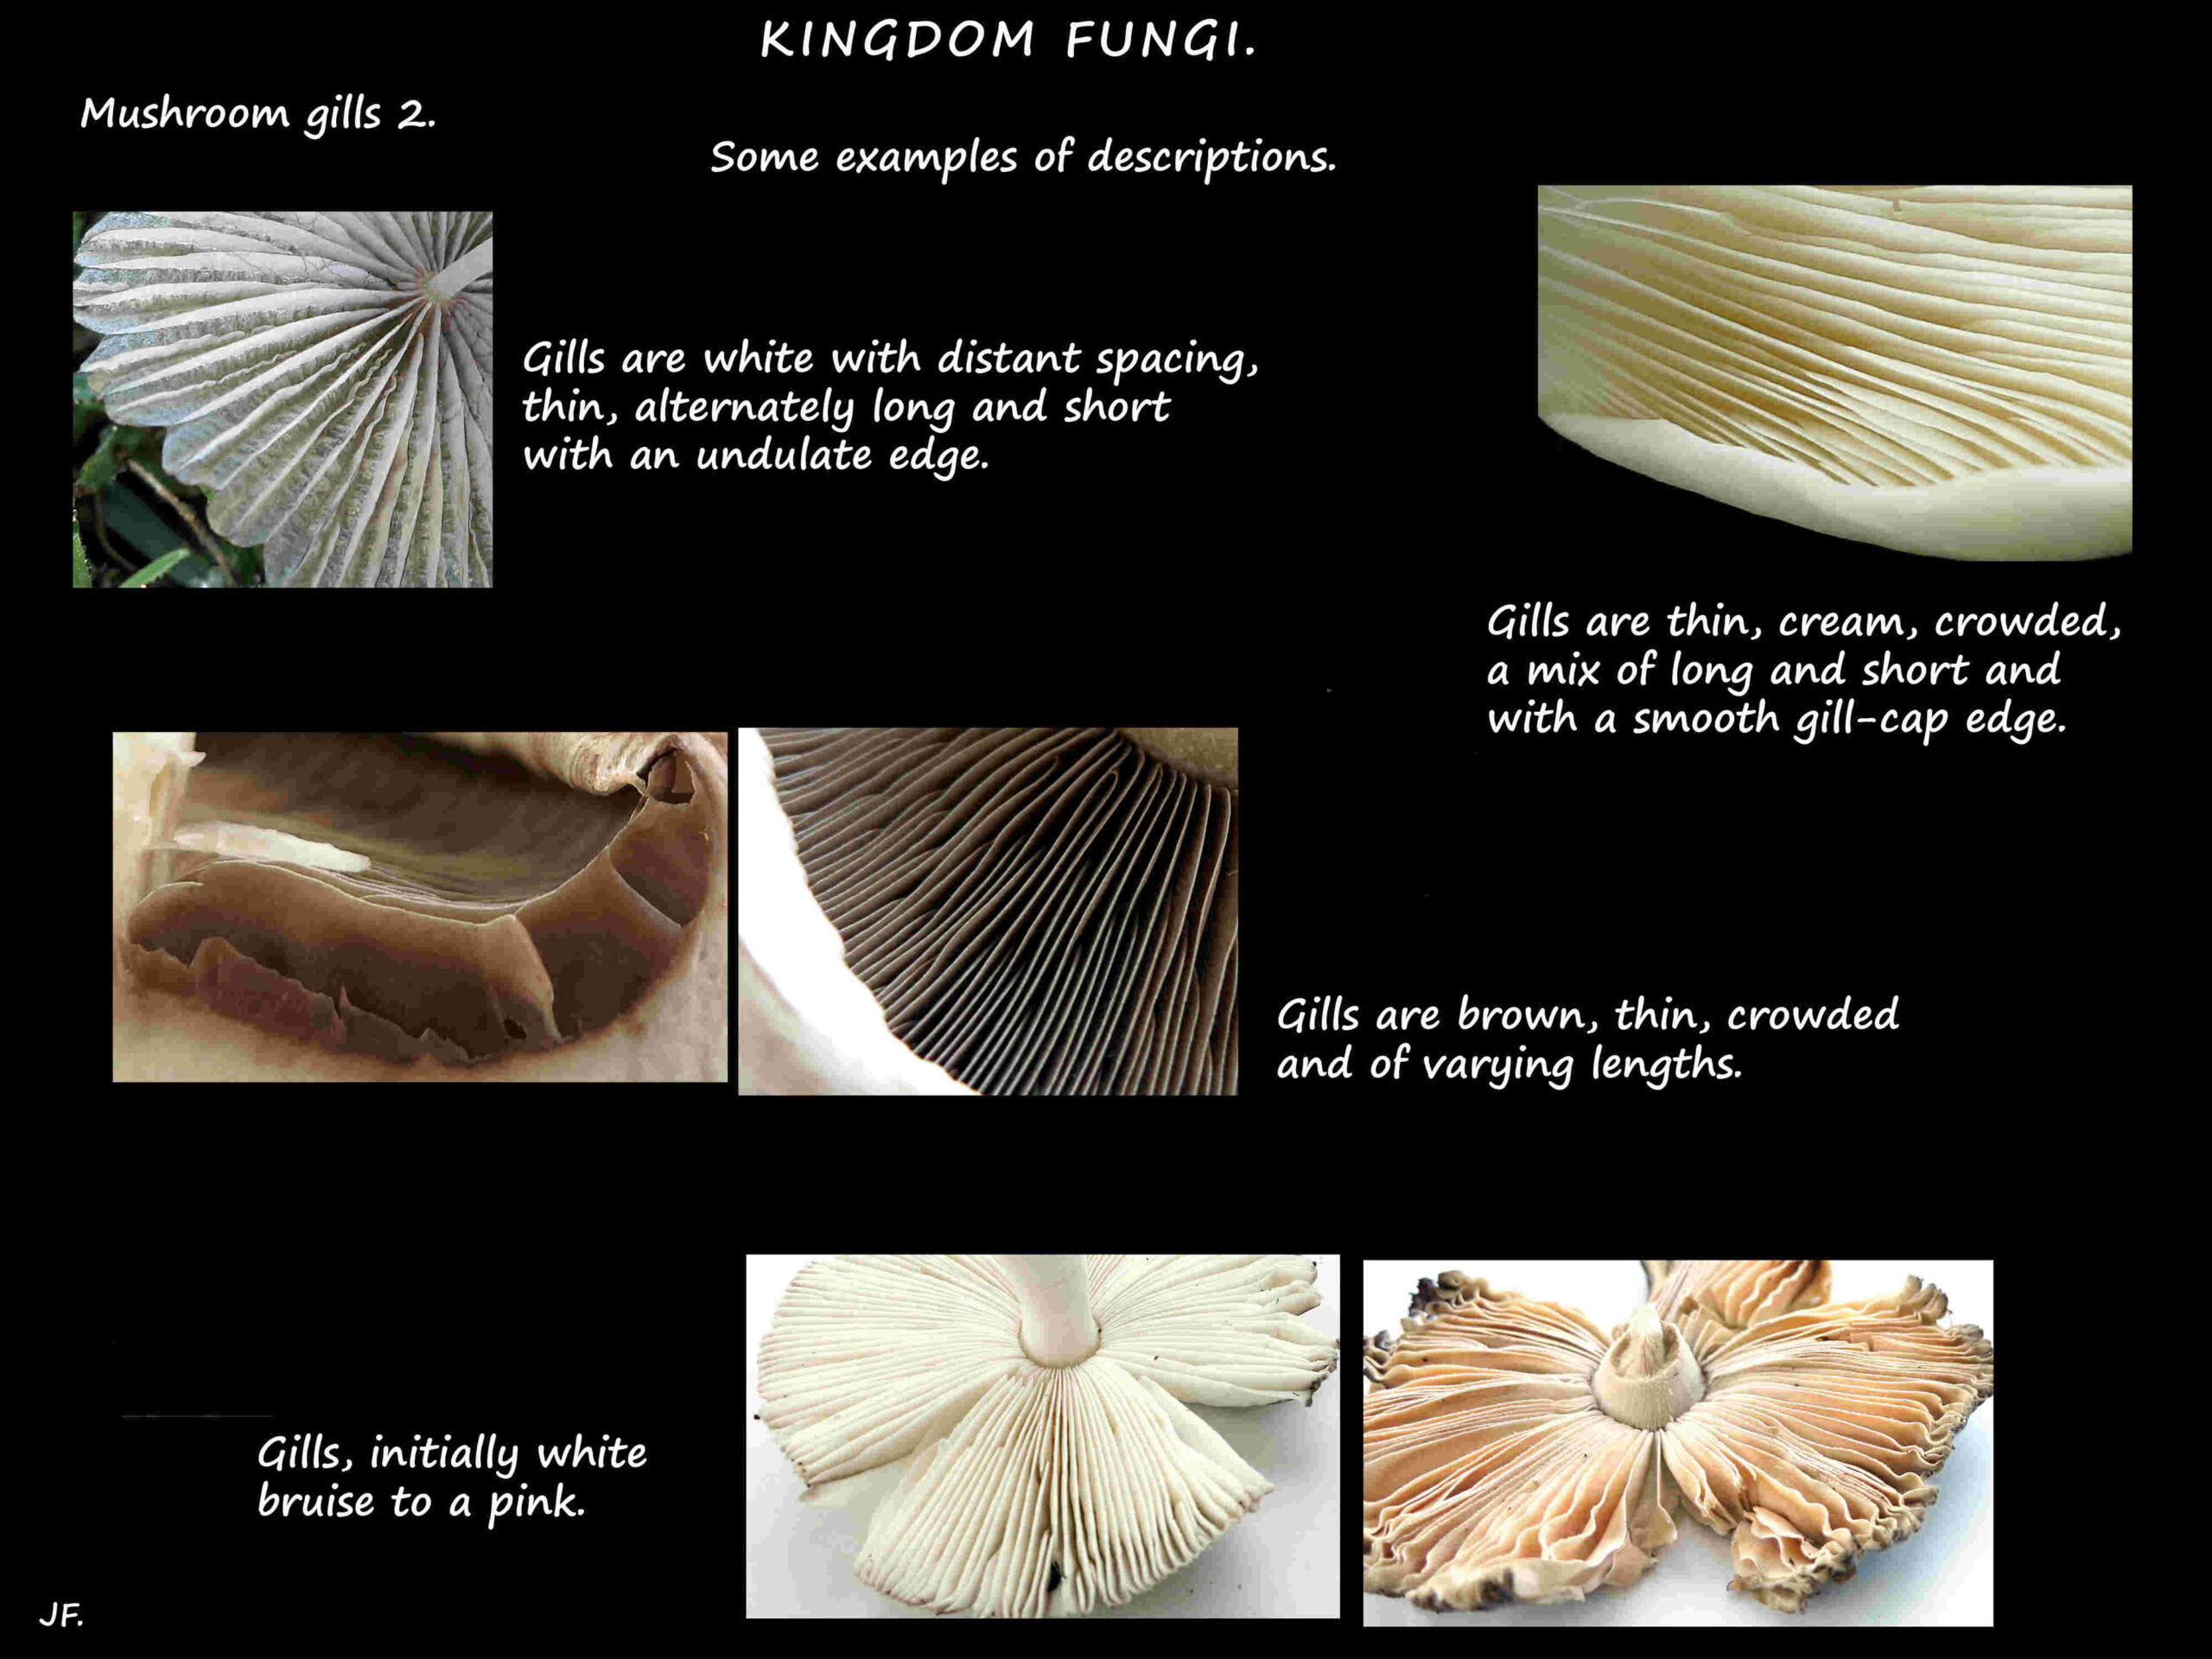 13 Some more mushroom gill features